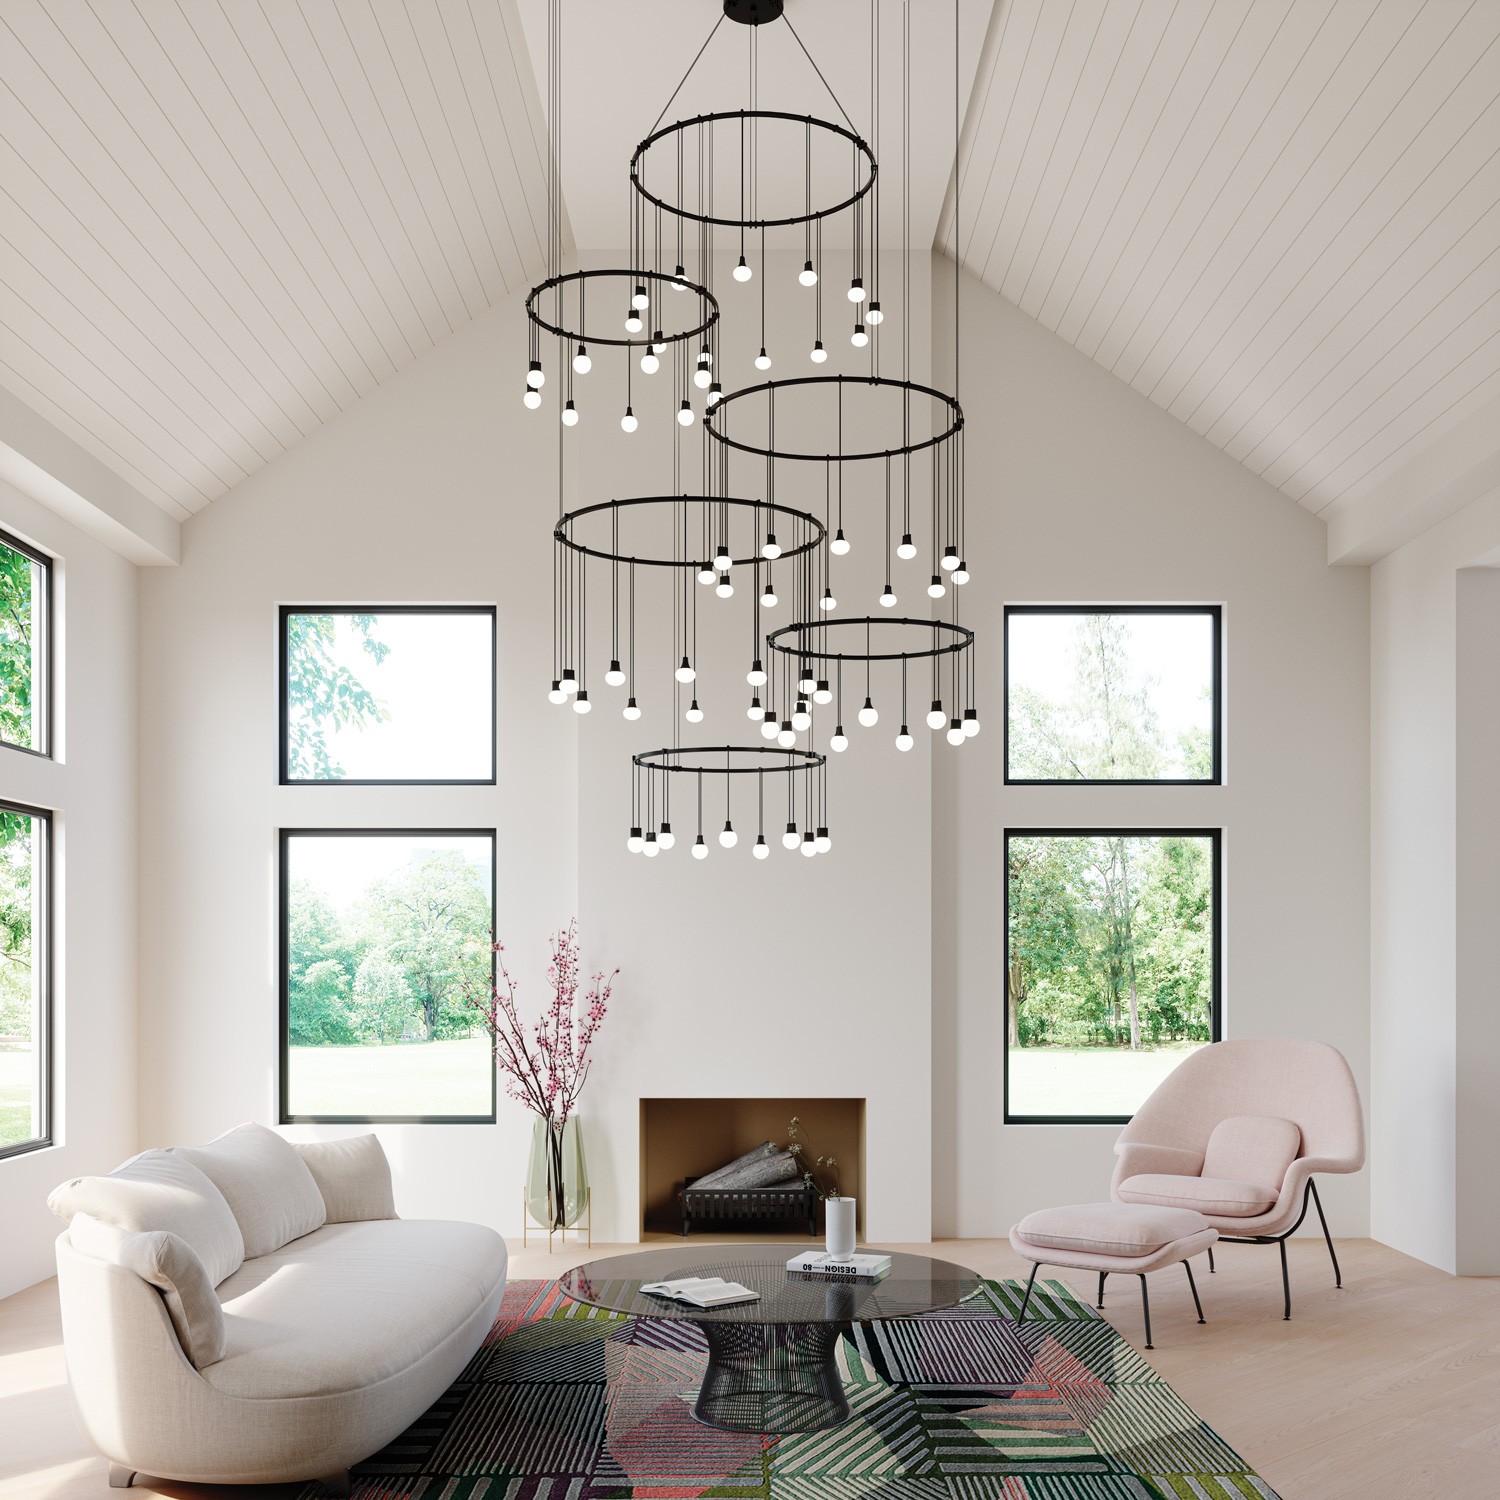 Suspenders 24-Inch LED Single Ring Chandelier in a vaulted ceiling living room.